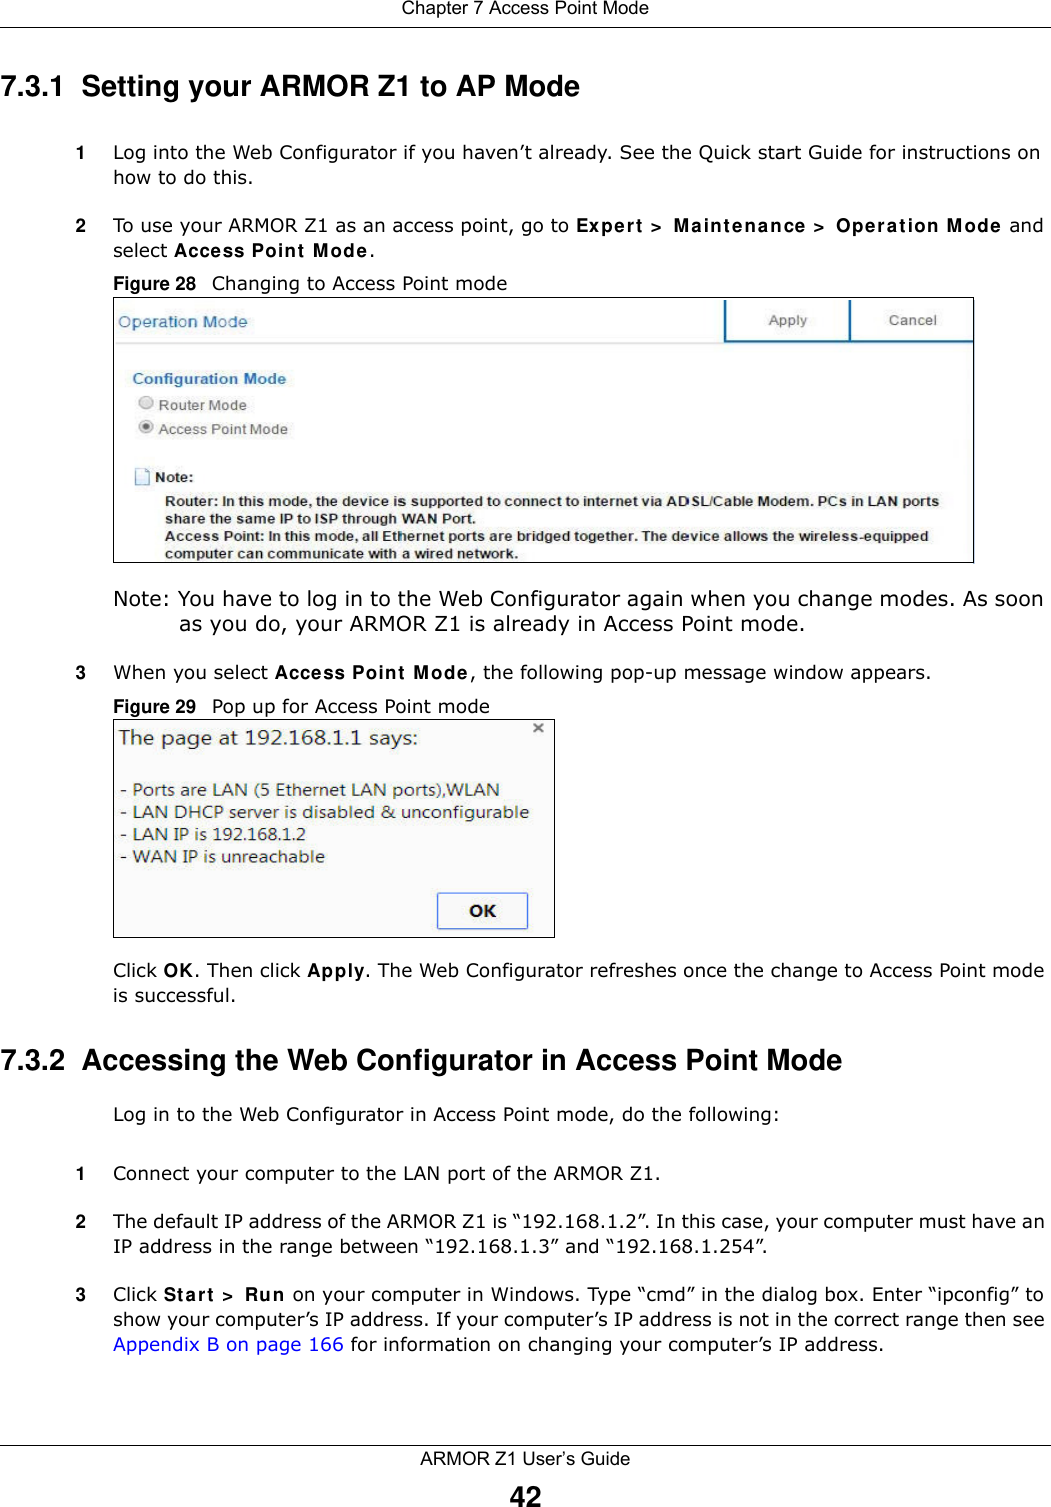 Chapter 7 Access Point ModeARMOR Z1 User’s Guide427.3.1  Setting your ARMOR Z1 to AP Mode1Log into the Web Configurator if you haven’t already. See the Quick start Guide for instructions on how to do this.2To use your ARMOR Z1 as an access point, go to Expert &gt; Maintenance &gt; Operation Mode and select Access Point Mode. Figure 28   Changing to Access Point modeNote: You have to log in to the Web Configurator again when you change modes. As soon as you do, your ARMOR Z1 is already in Access Point mode.3When you select Access Point Mode, the following pop-up message window appears.Figure 29   Pop up for Access Point mode Click OK. Then click Apply. The Web Configurator refreshes once the change to Access Point mode is successful.7.3.2  Accessing the Web Configurator in Access Point ModeLog in to the Web Configurator in Access Point mode, do the following:1Connect your computer to the LAN port of the ARMOR Z1. 2The default IP address of the ARMOR Z1 is “192.168.1.2”. In this case, your computer must have an IP address in the range between “192.168.1.3” and “192.168.1.254”.3Click Start &gt; Run on your computer in Windows. Type “cmd” in the dialog box. Enter “ipconfig” to show your computer’s IP address. If your computer’s IP address is not in the correct range then see Appendix B on page 166 for information on changing your computer’s IP address.